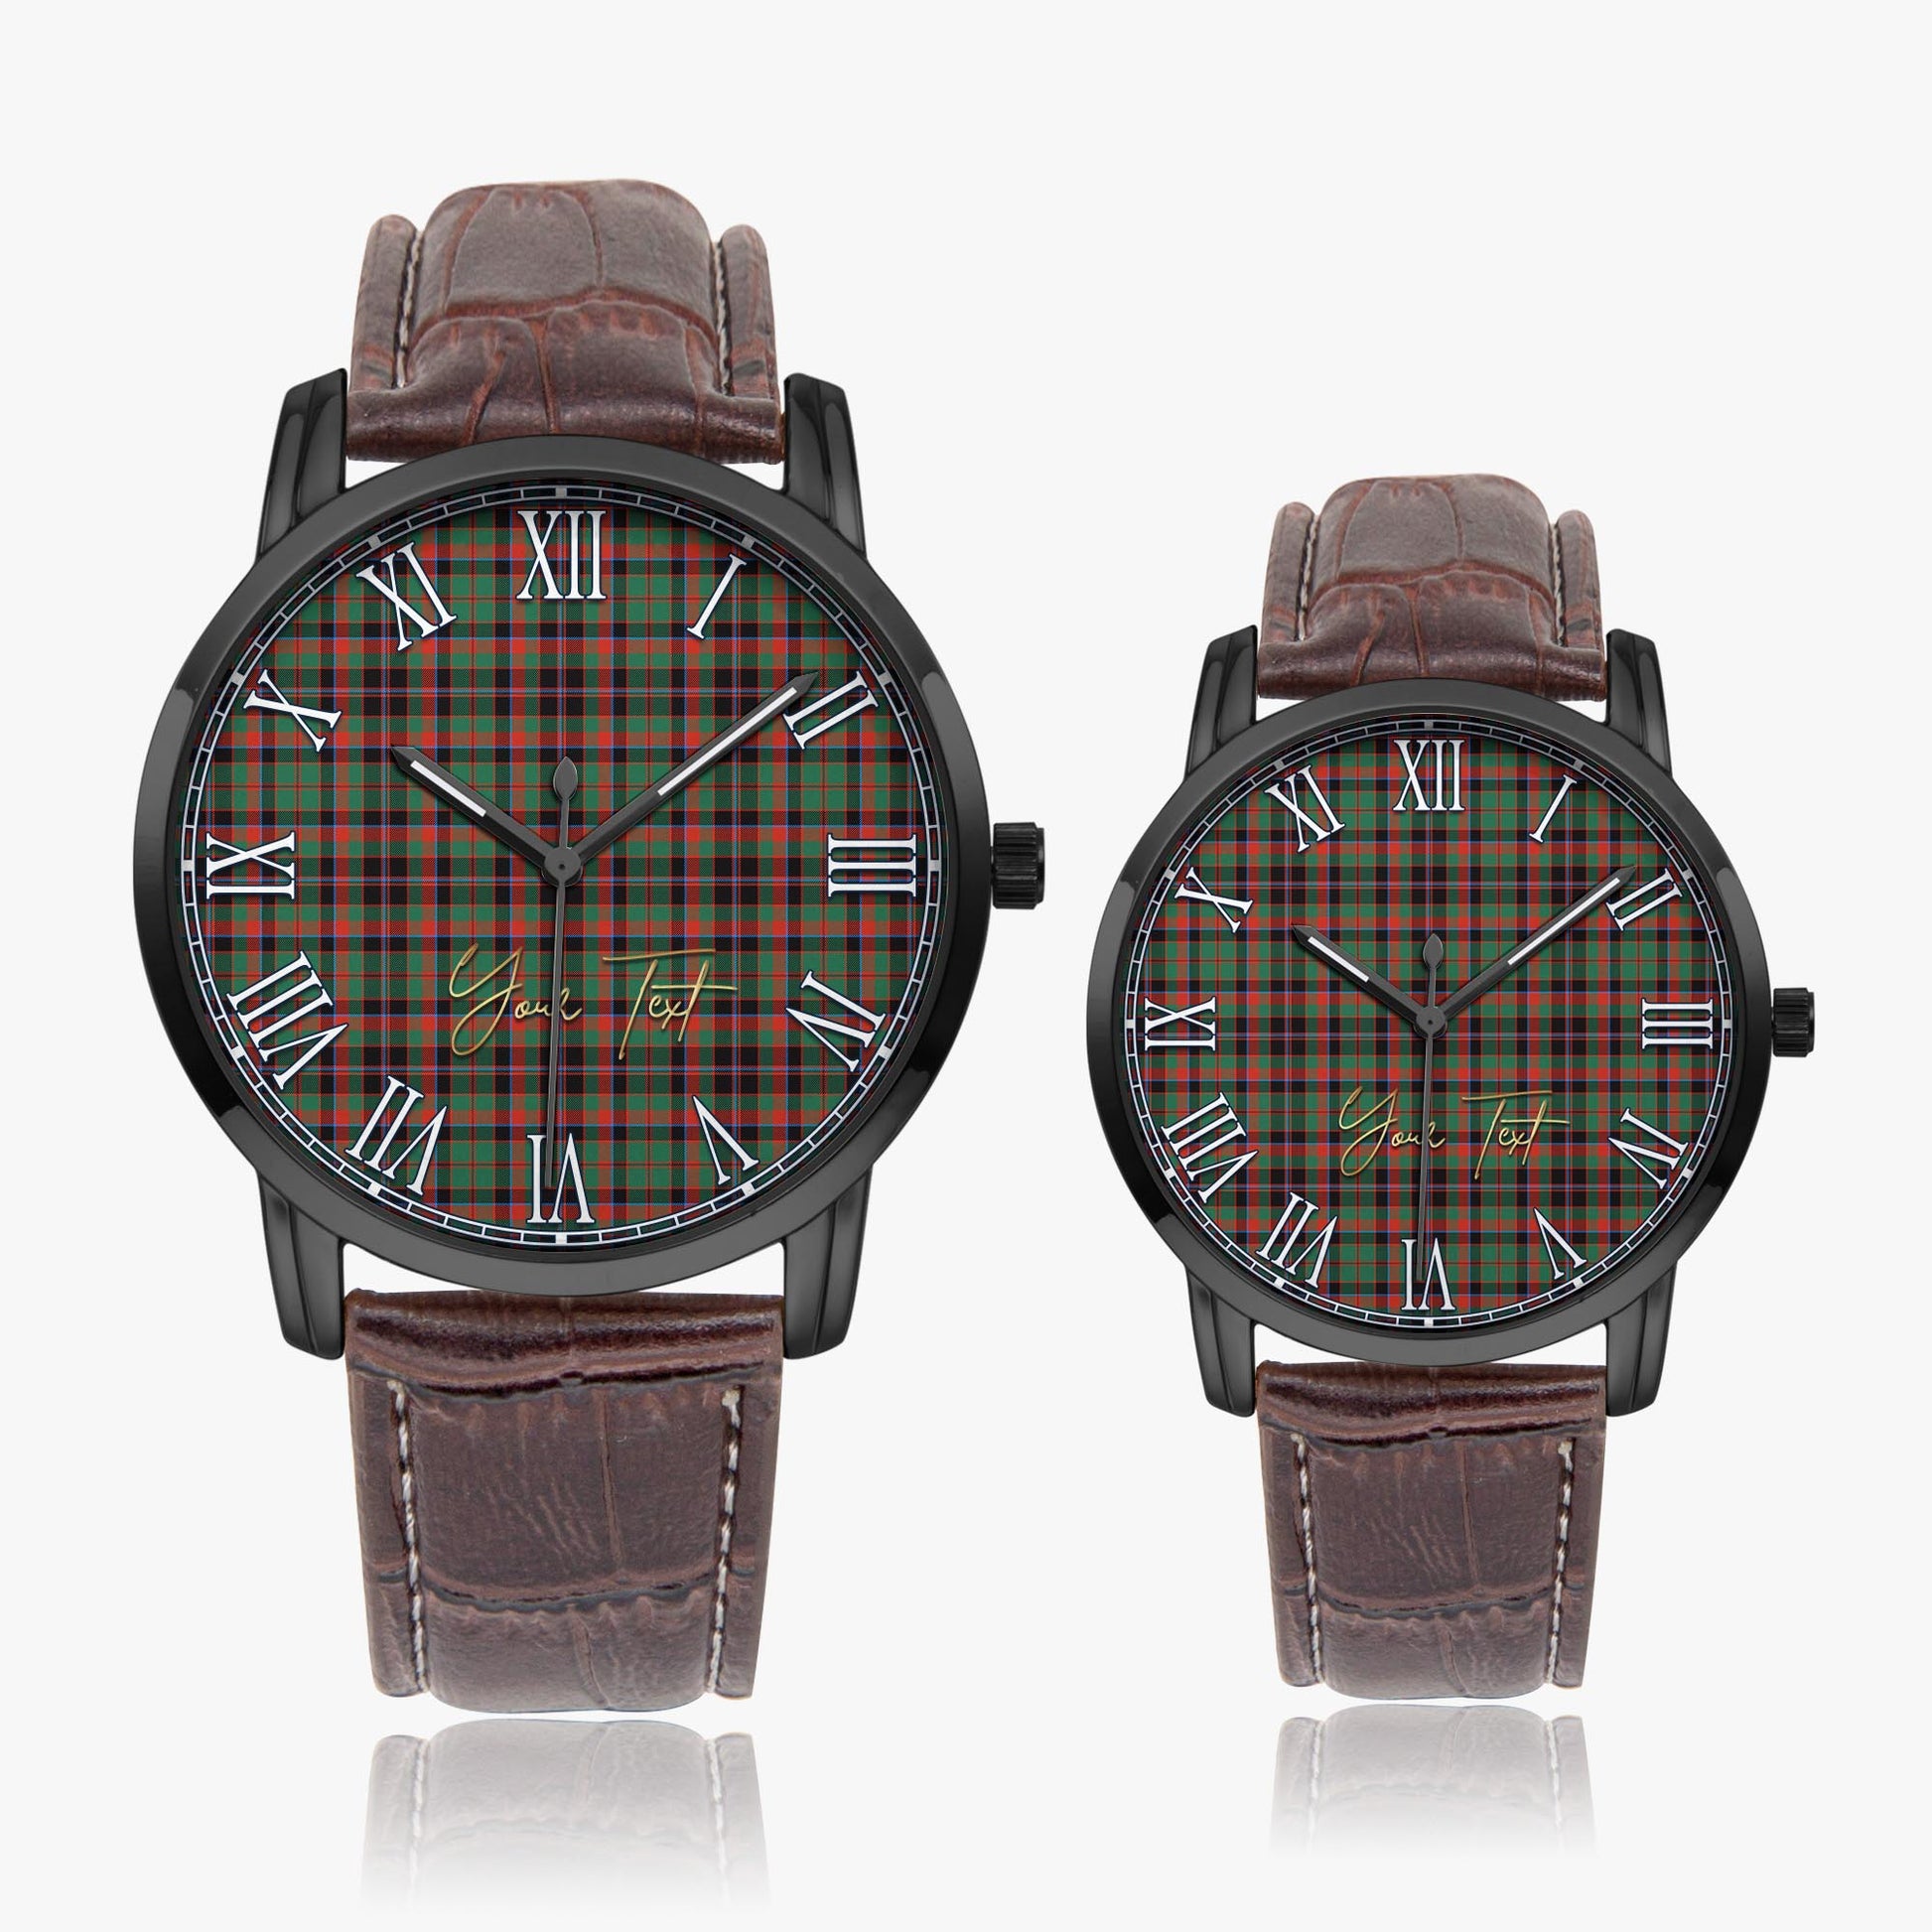 Cumming Hunting Ancient Tartan Personalized Your Text Leather Trap Quartz Watch Wide Type Black Case With Brown Leather Strap - Tartanvibesclothing